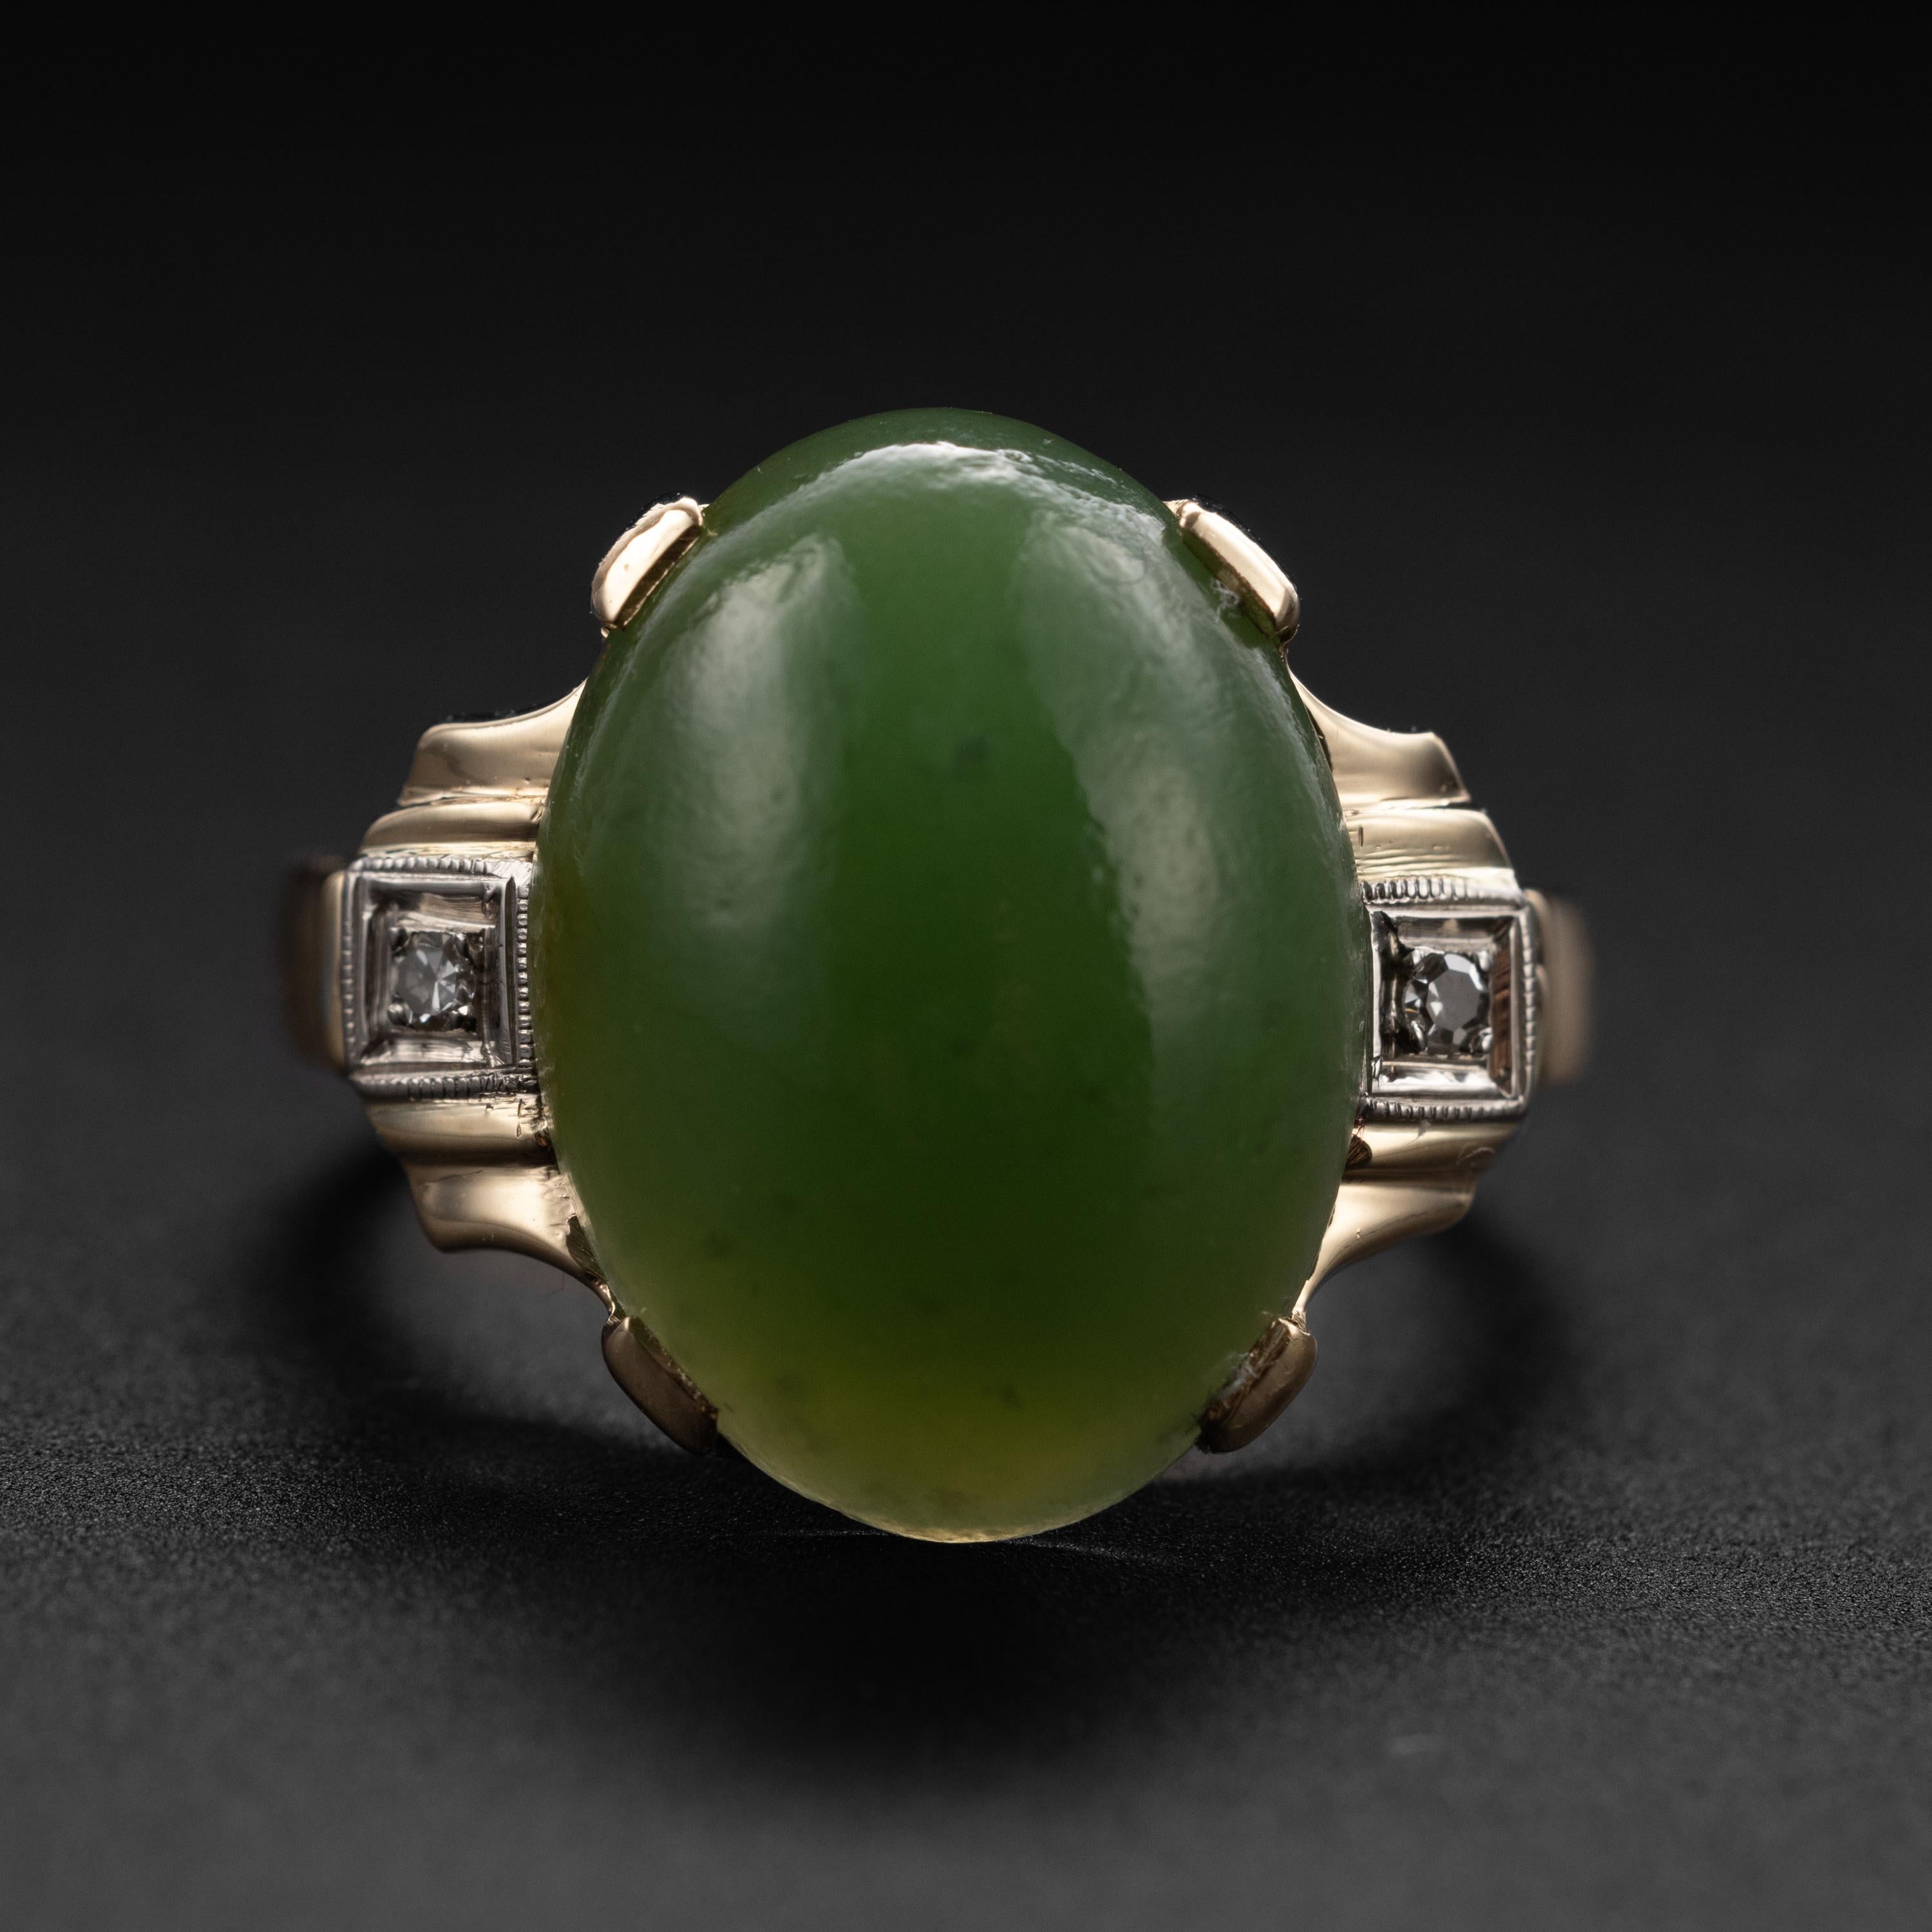 This late Deco / early Retro ring (circa 1940) was created by New York jewelry firm, Baden & Foss. Featuring a 16.24mm x 11.98 cabochon of a medium green tone, prong-set and flanked on both sides with a pair of tiny old single-cut diamonds, this 14K